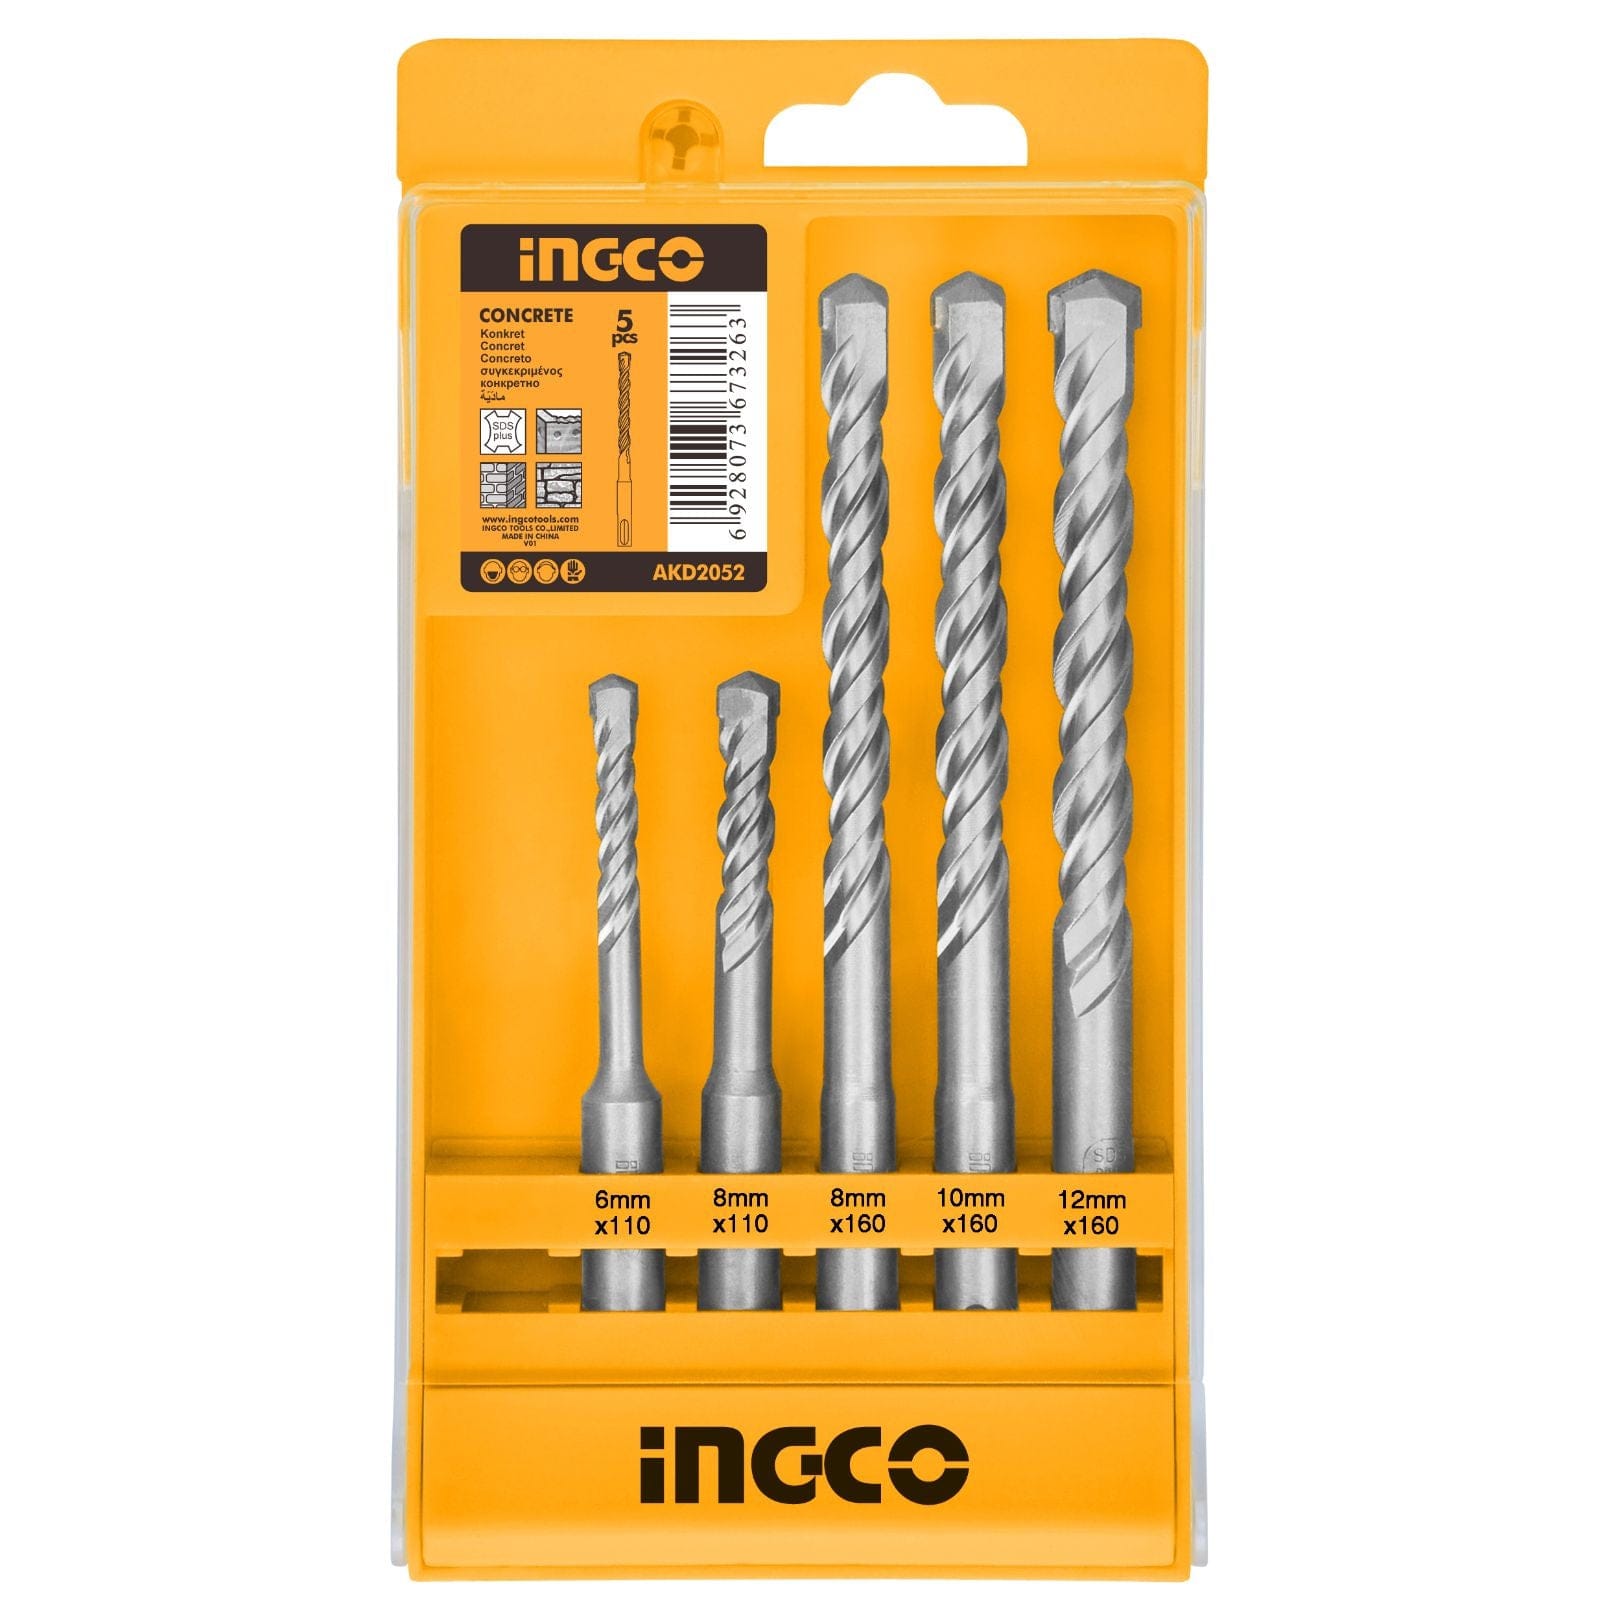 Ingco 5 Pieces SDS Plus Hammer Drill Bit Set - AKD2052 | Supply Master | Accra, Ghana Drill Bits Buy Tools hardware Building materials